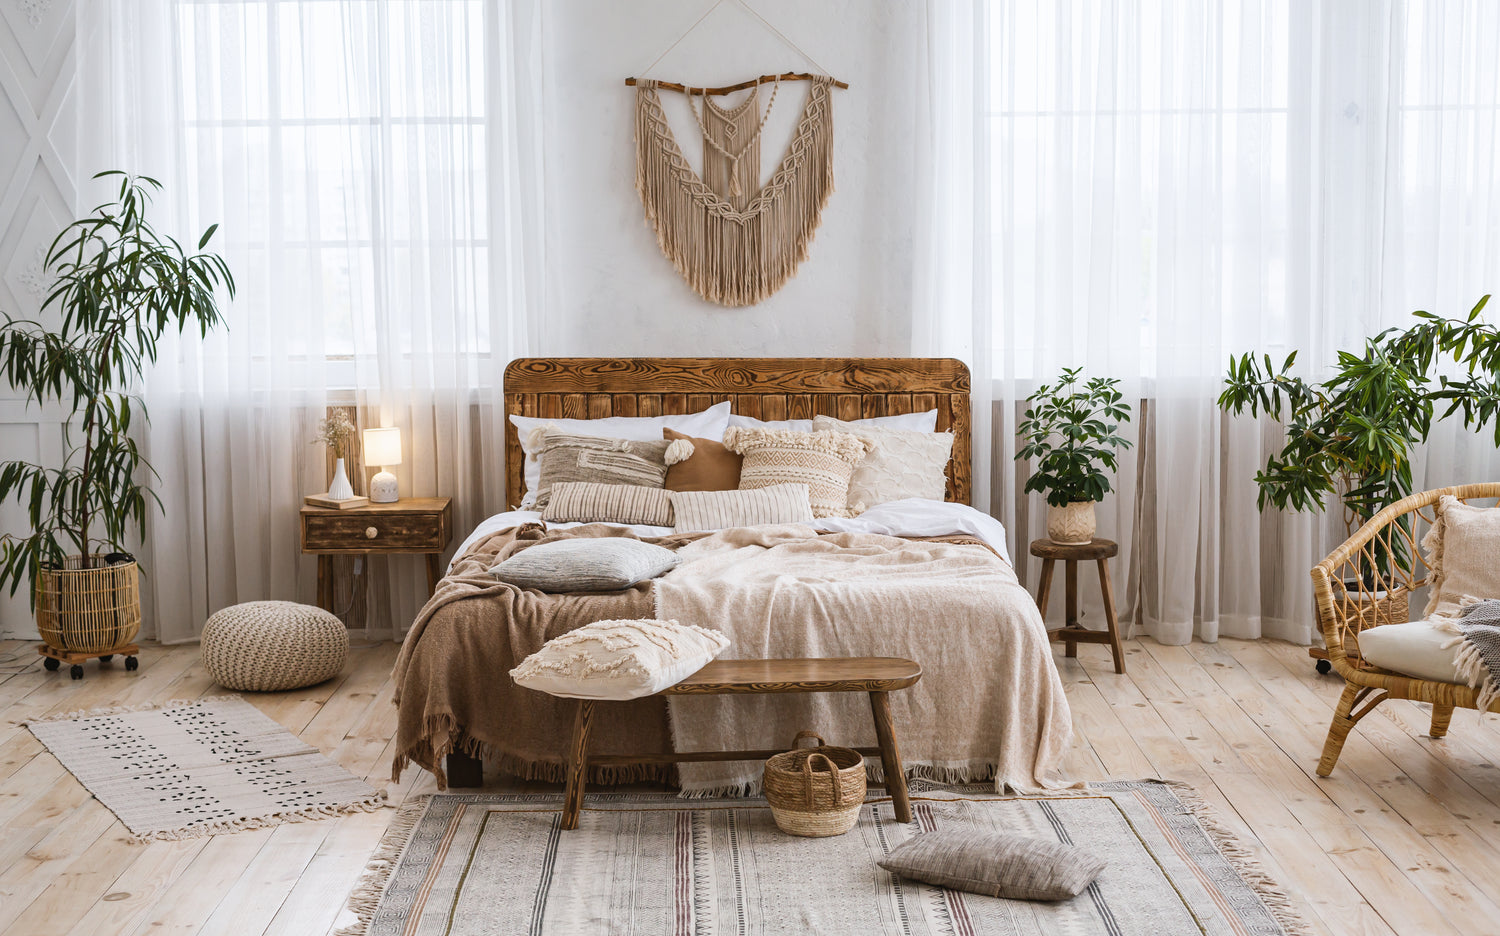 Cosy home design with ethnic boho decoration. Bed with pillows, wooden and rattan furniture